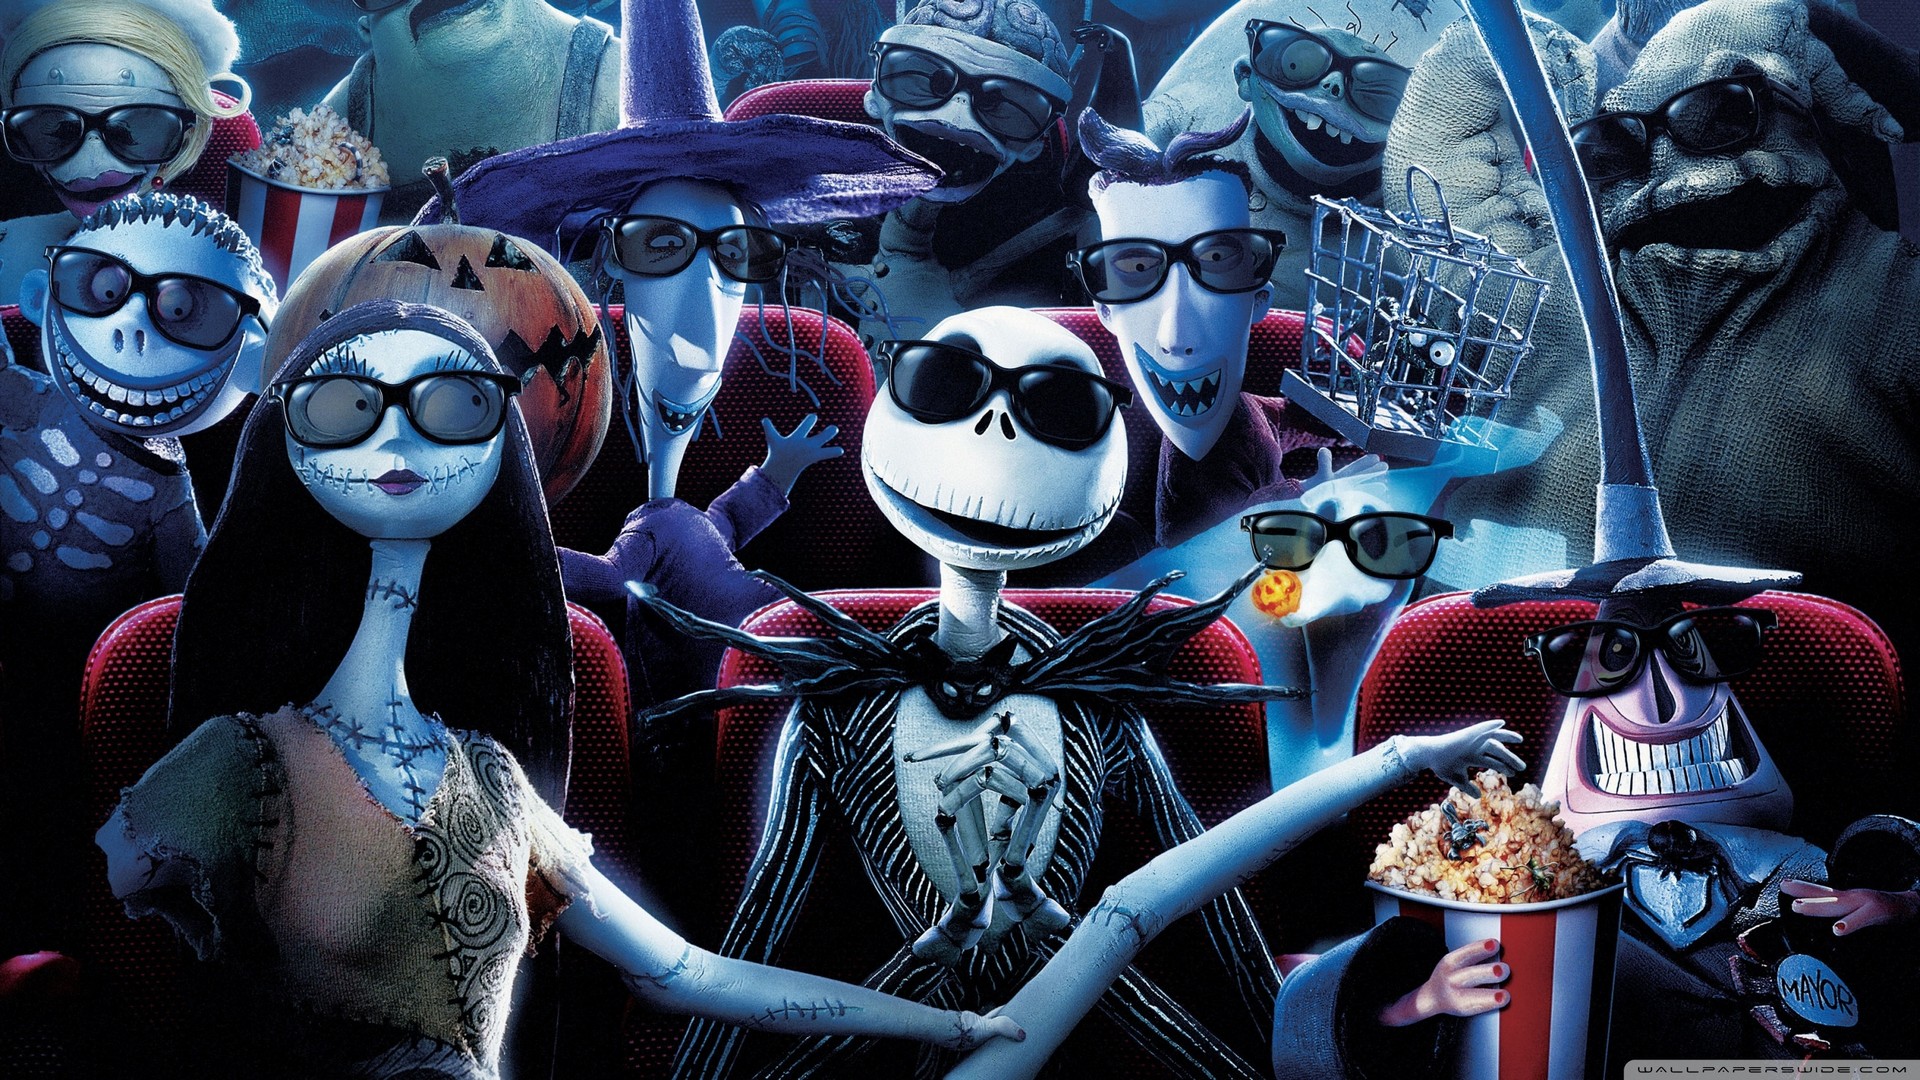 Nightmare Before Christmas Movie Wallpaper with high-resolution 1920x1080 pixel. You can use this poster wallpaper for your Desktop Computers, Mac Screensavers, Windows Backgrounds, iPhone Wallpapers, Tablet or Android Lock screen and another Mobile device